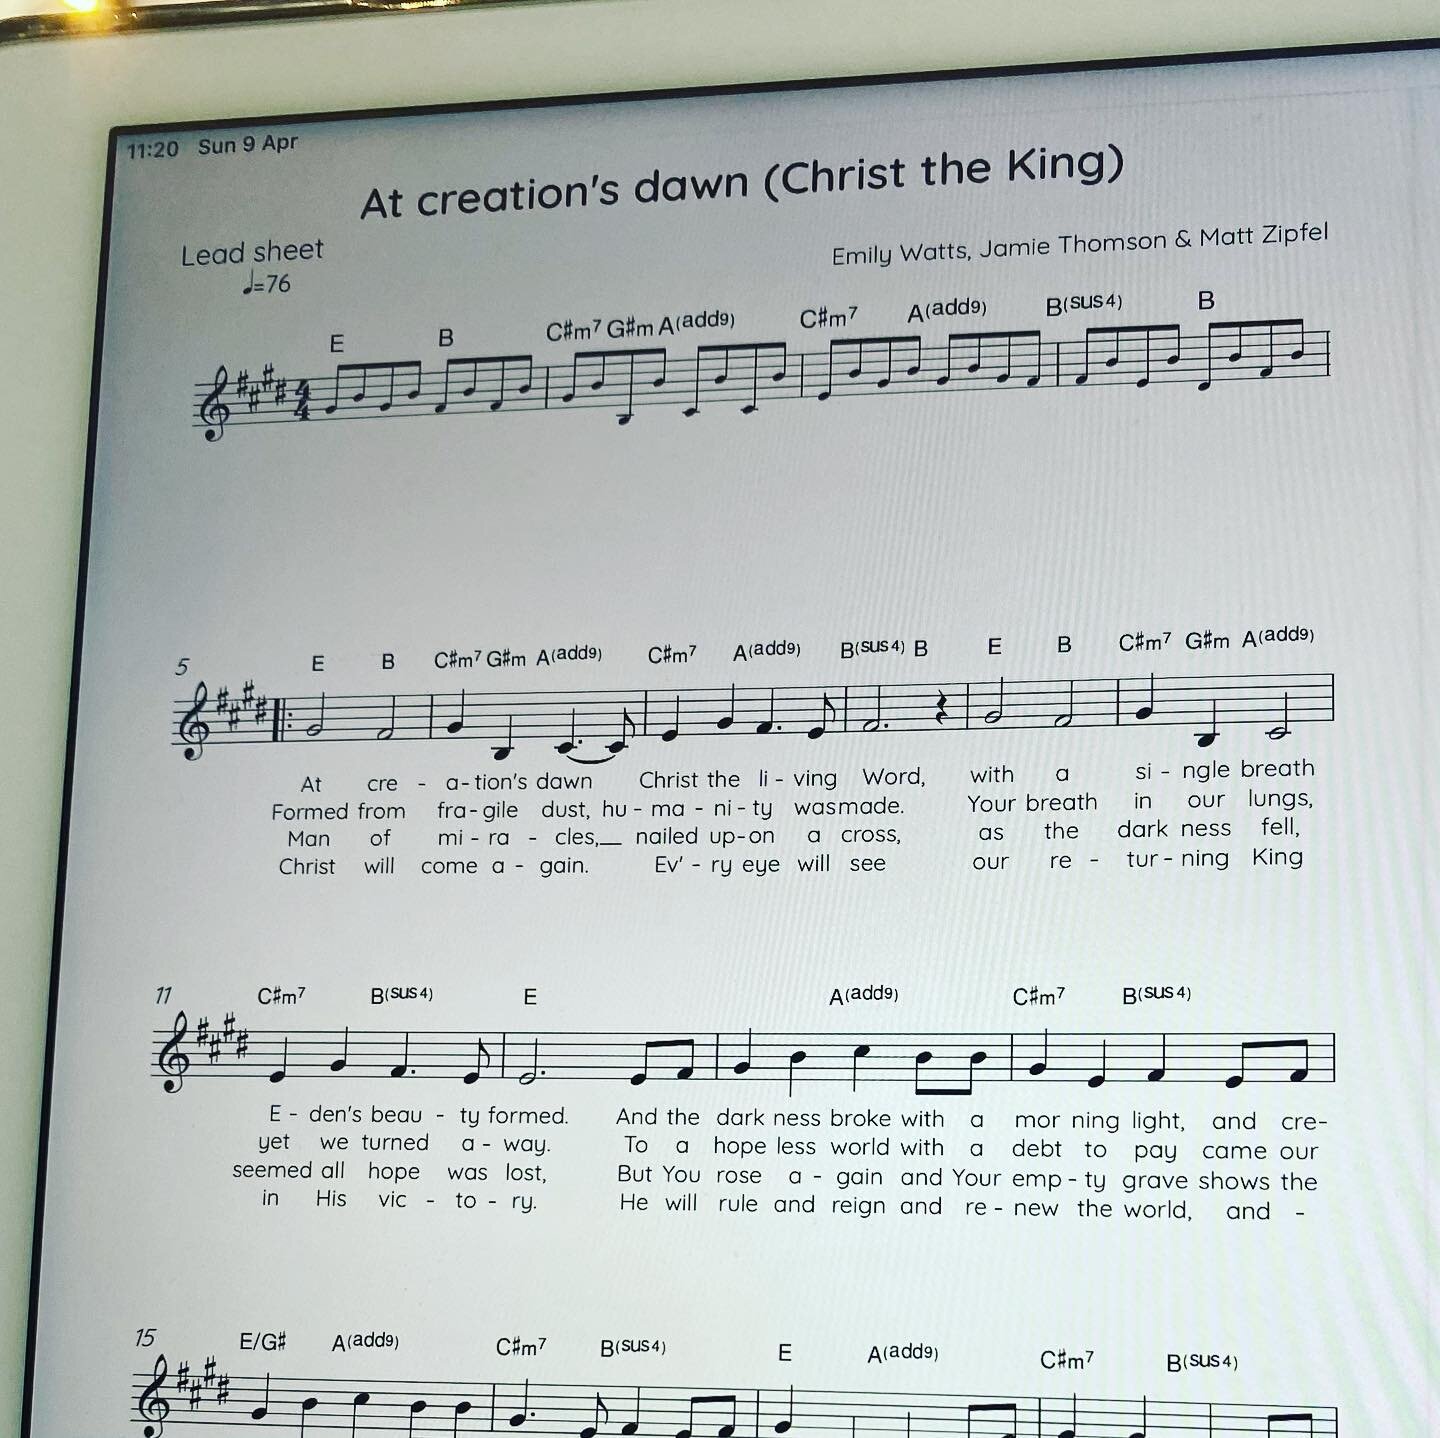 Such a good song to sing at #Easter - we did today at @stmarksob co-written with @jamie_thomson @emilywattsmusic